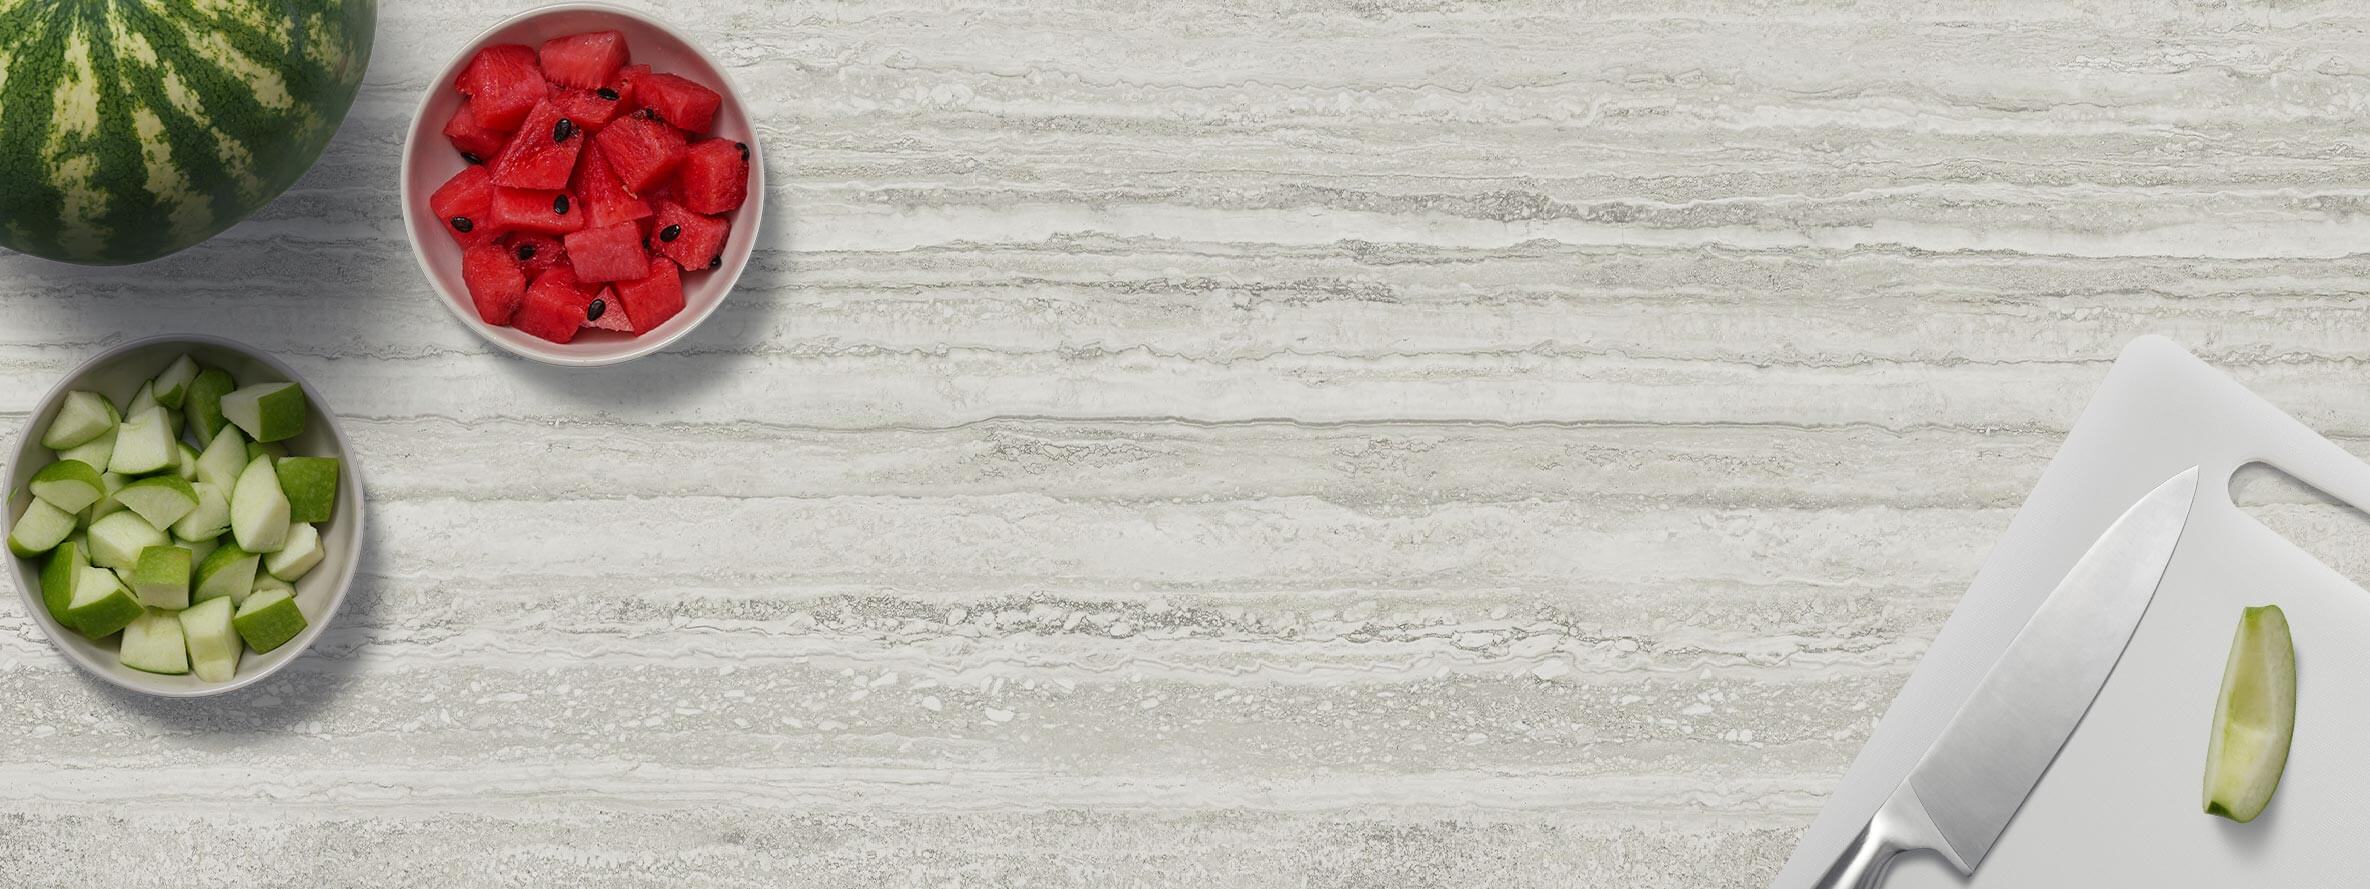 <h3 class="script">On Trend Patterns</h3>
<h4>Get the look of quartz, granite and marble with our exciting laminate colours</h4>
<p><a class="pure-button pure-button-primary button-large" href="/colours" title="view all colours here">View Samples <em aria-hidden="true" class="fa-caret-right fas fa-fw"></em></a></p>